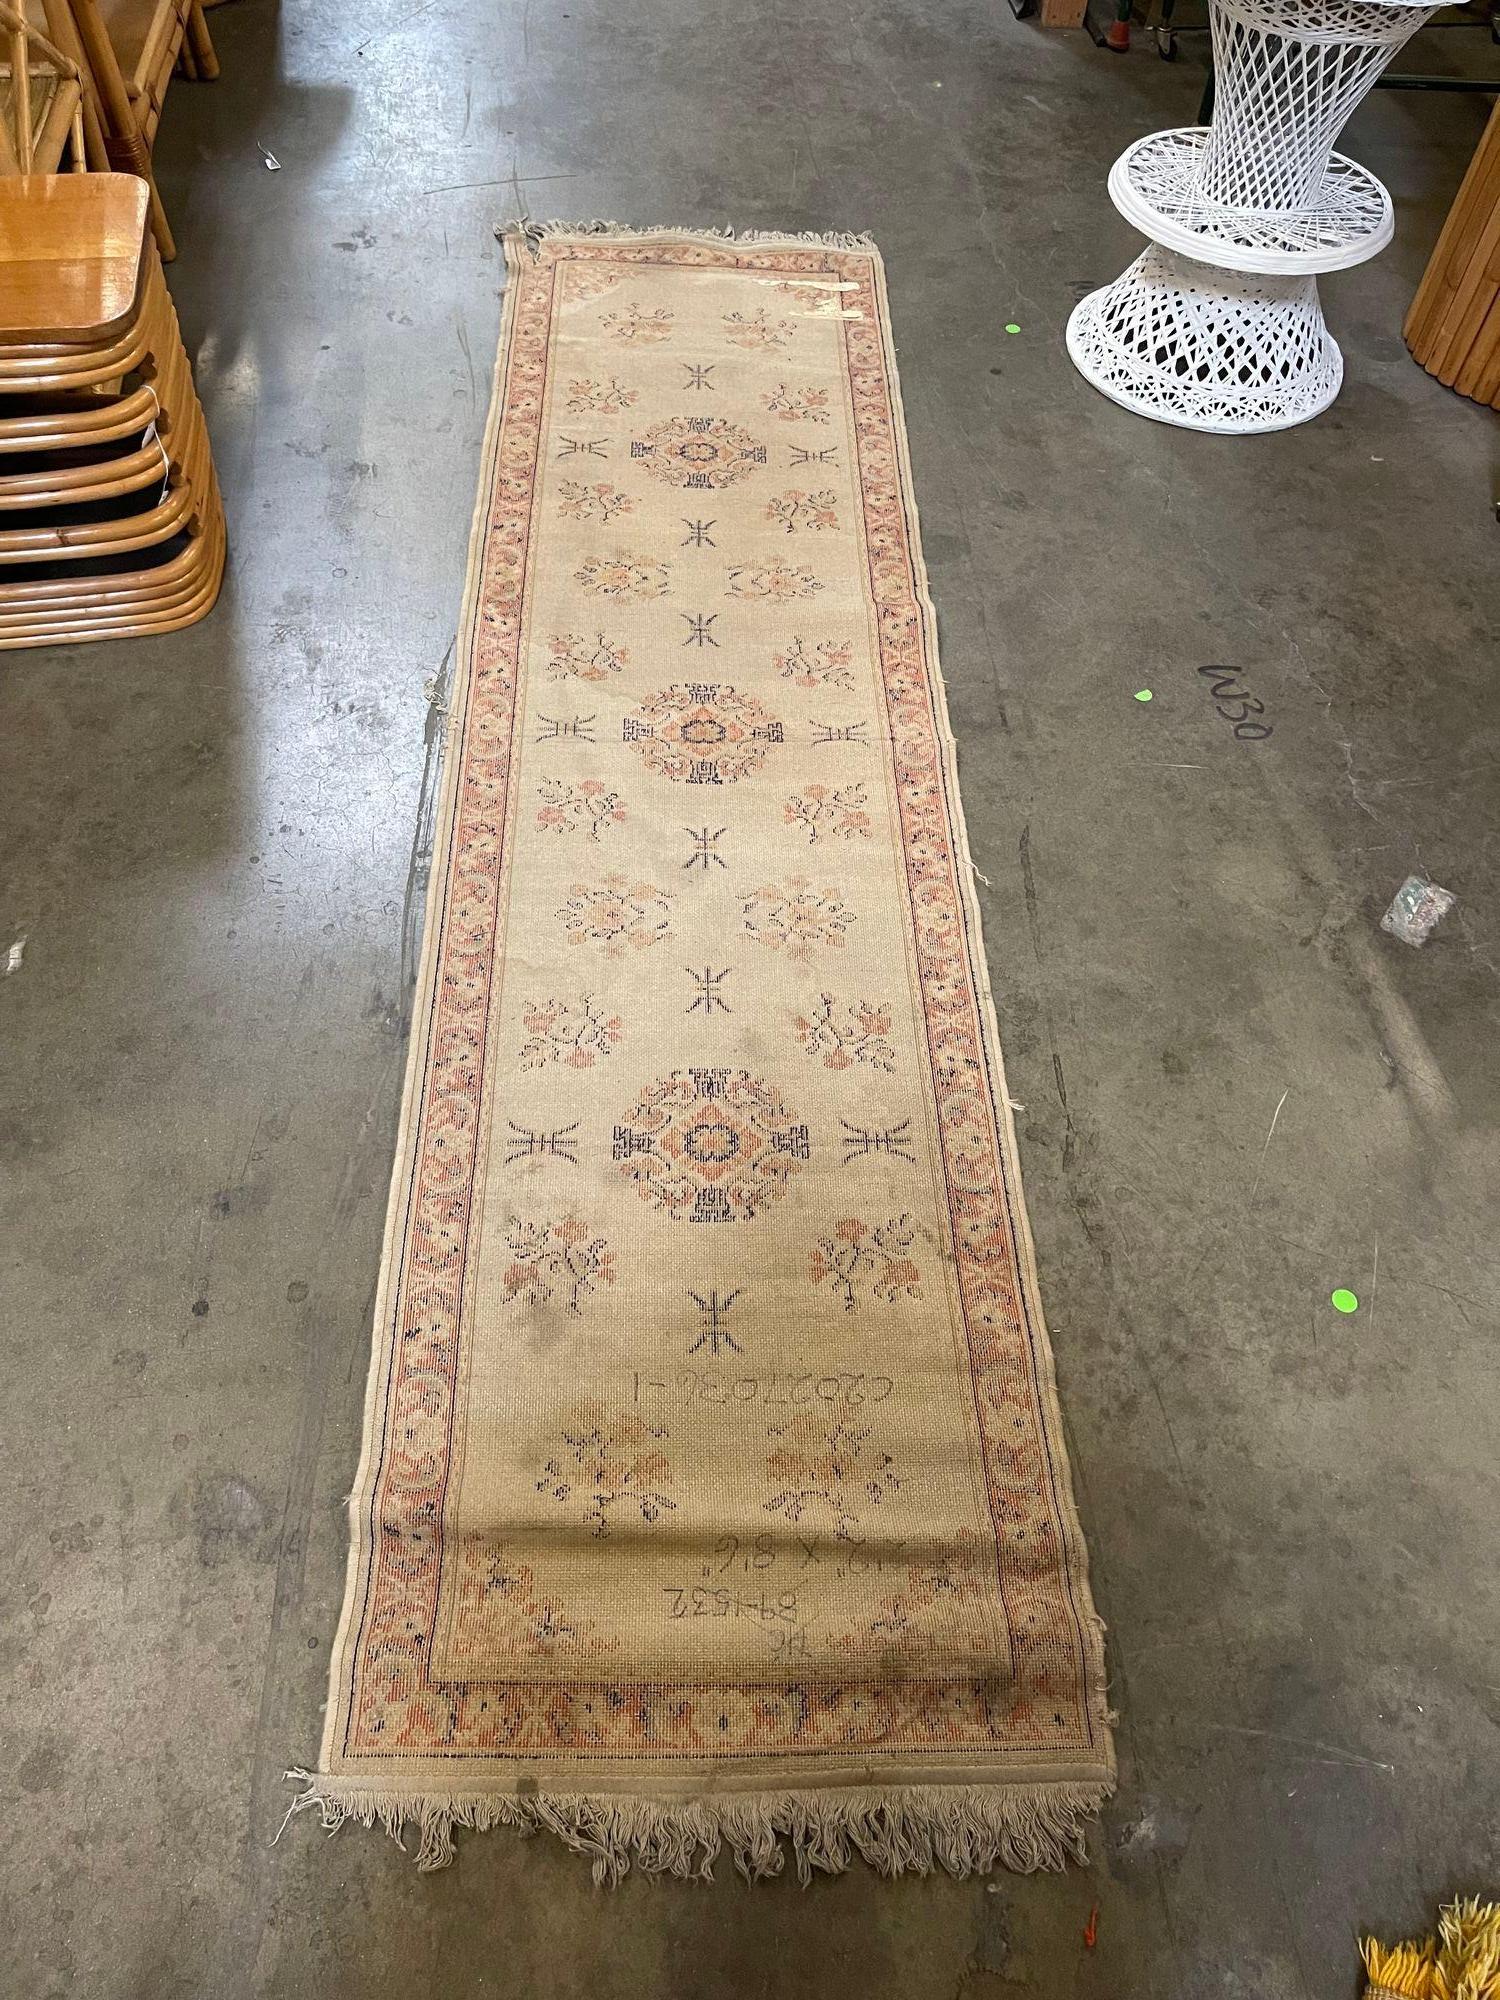 8.5' Foot Hand Knotted Wool Turkish Oushak Runner Rug In Excellent Condition For Sale In Van Nuys, CA